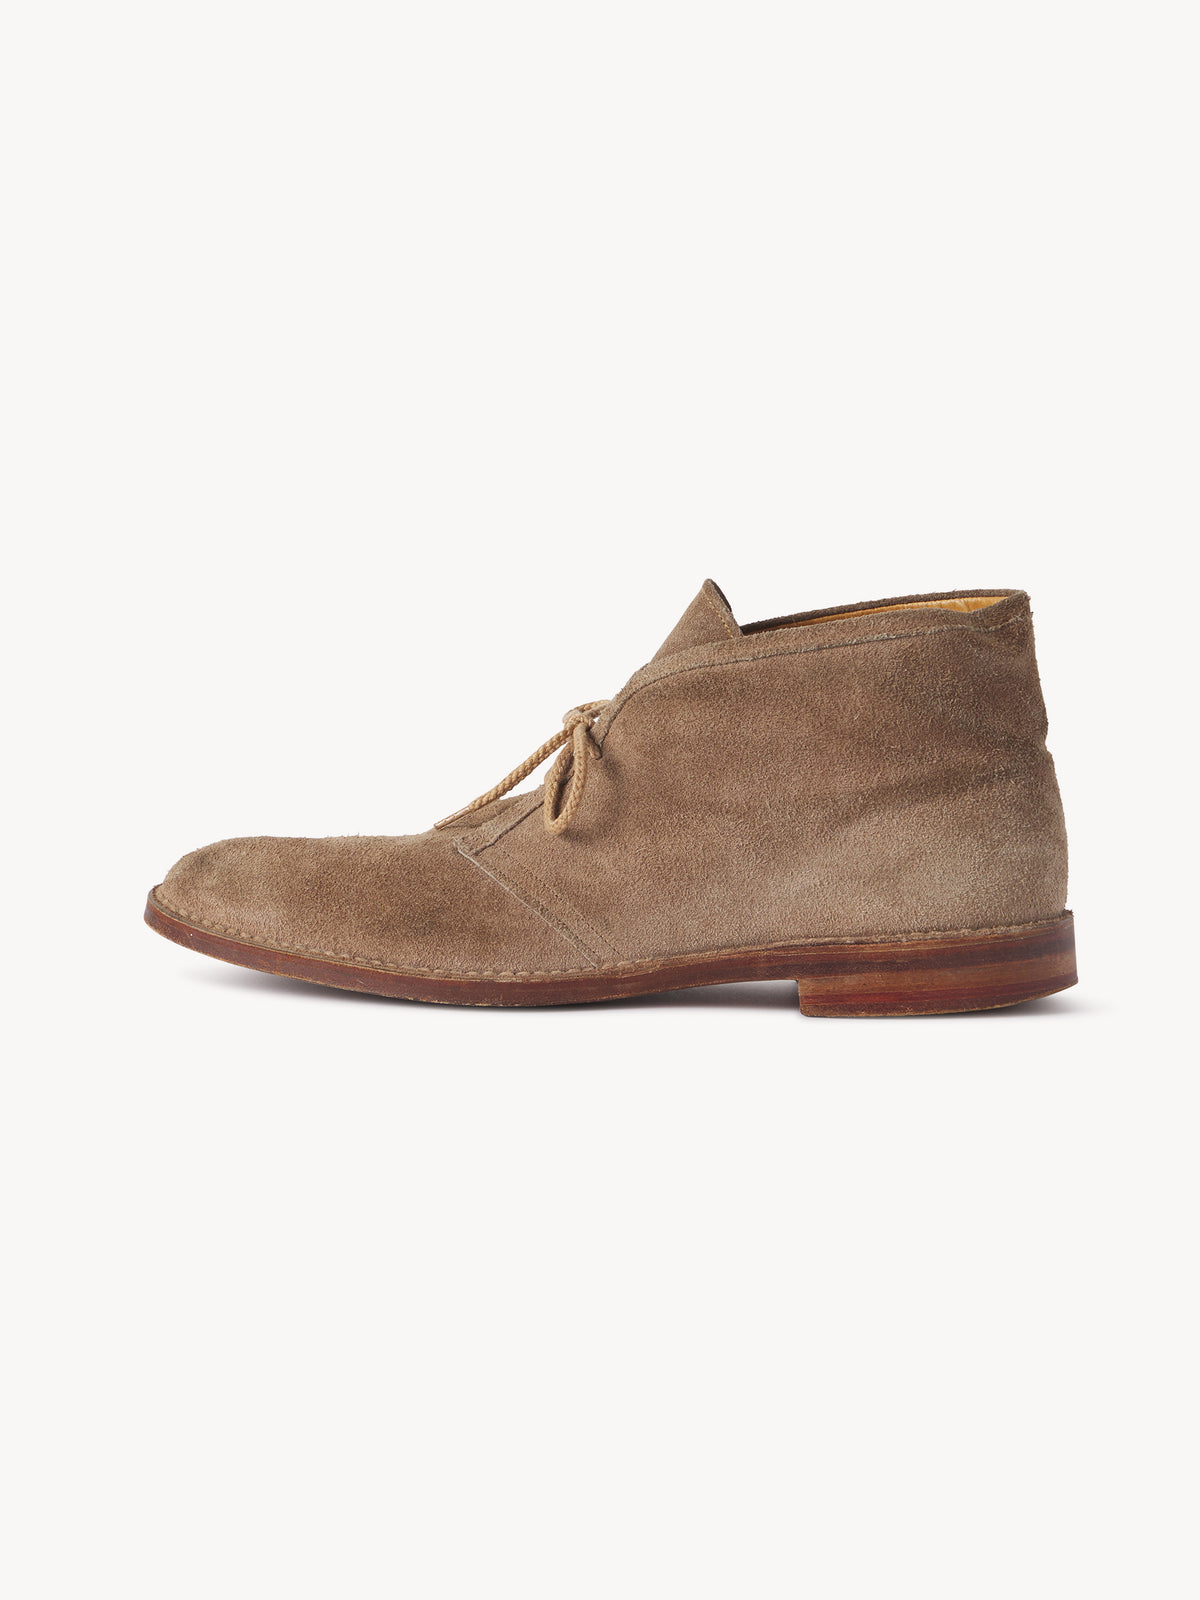 Made in England Clarks Leather Sole Desert Boot - 0157 - Product Flat